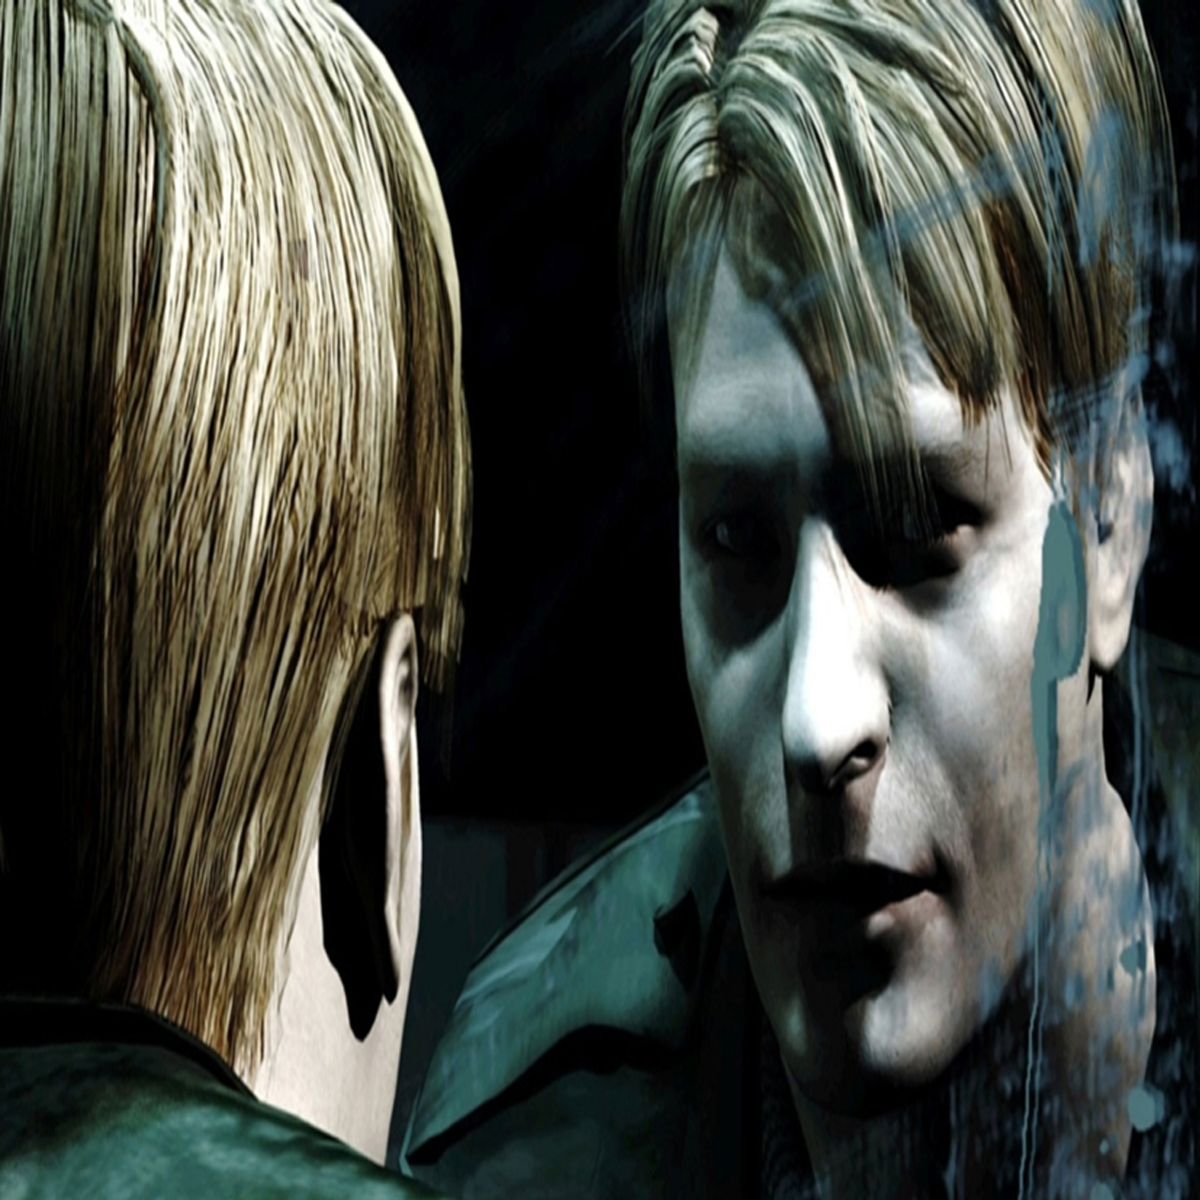 Silent Hill 2 Remake: Everything we know about the rumoured reboot